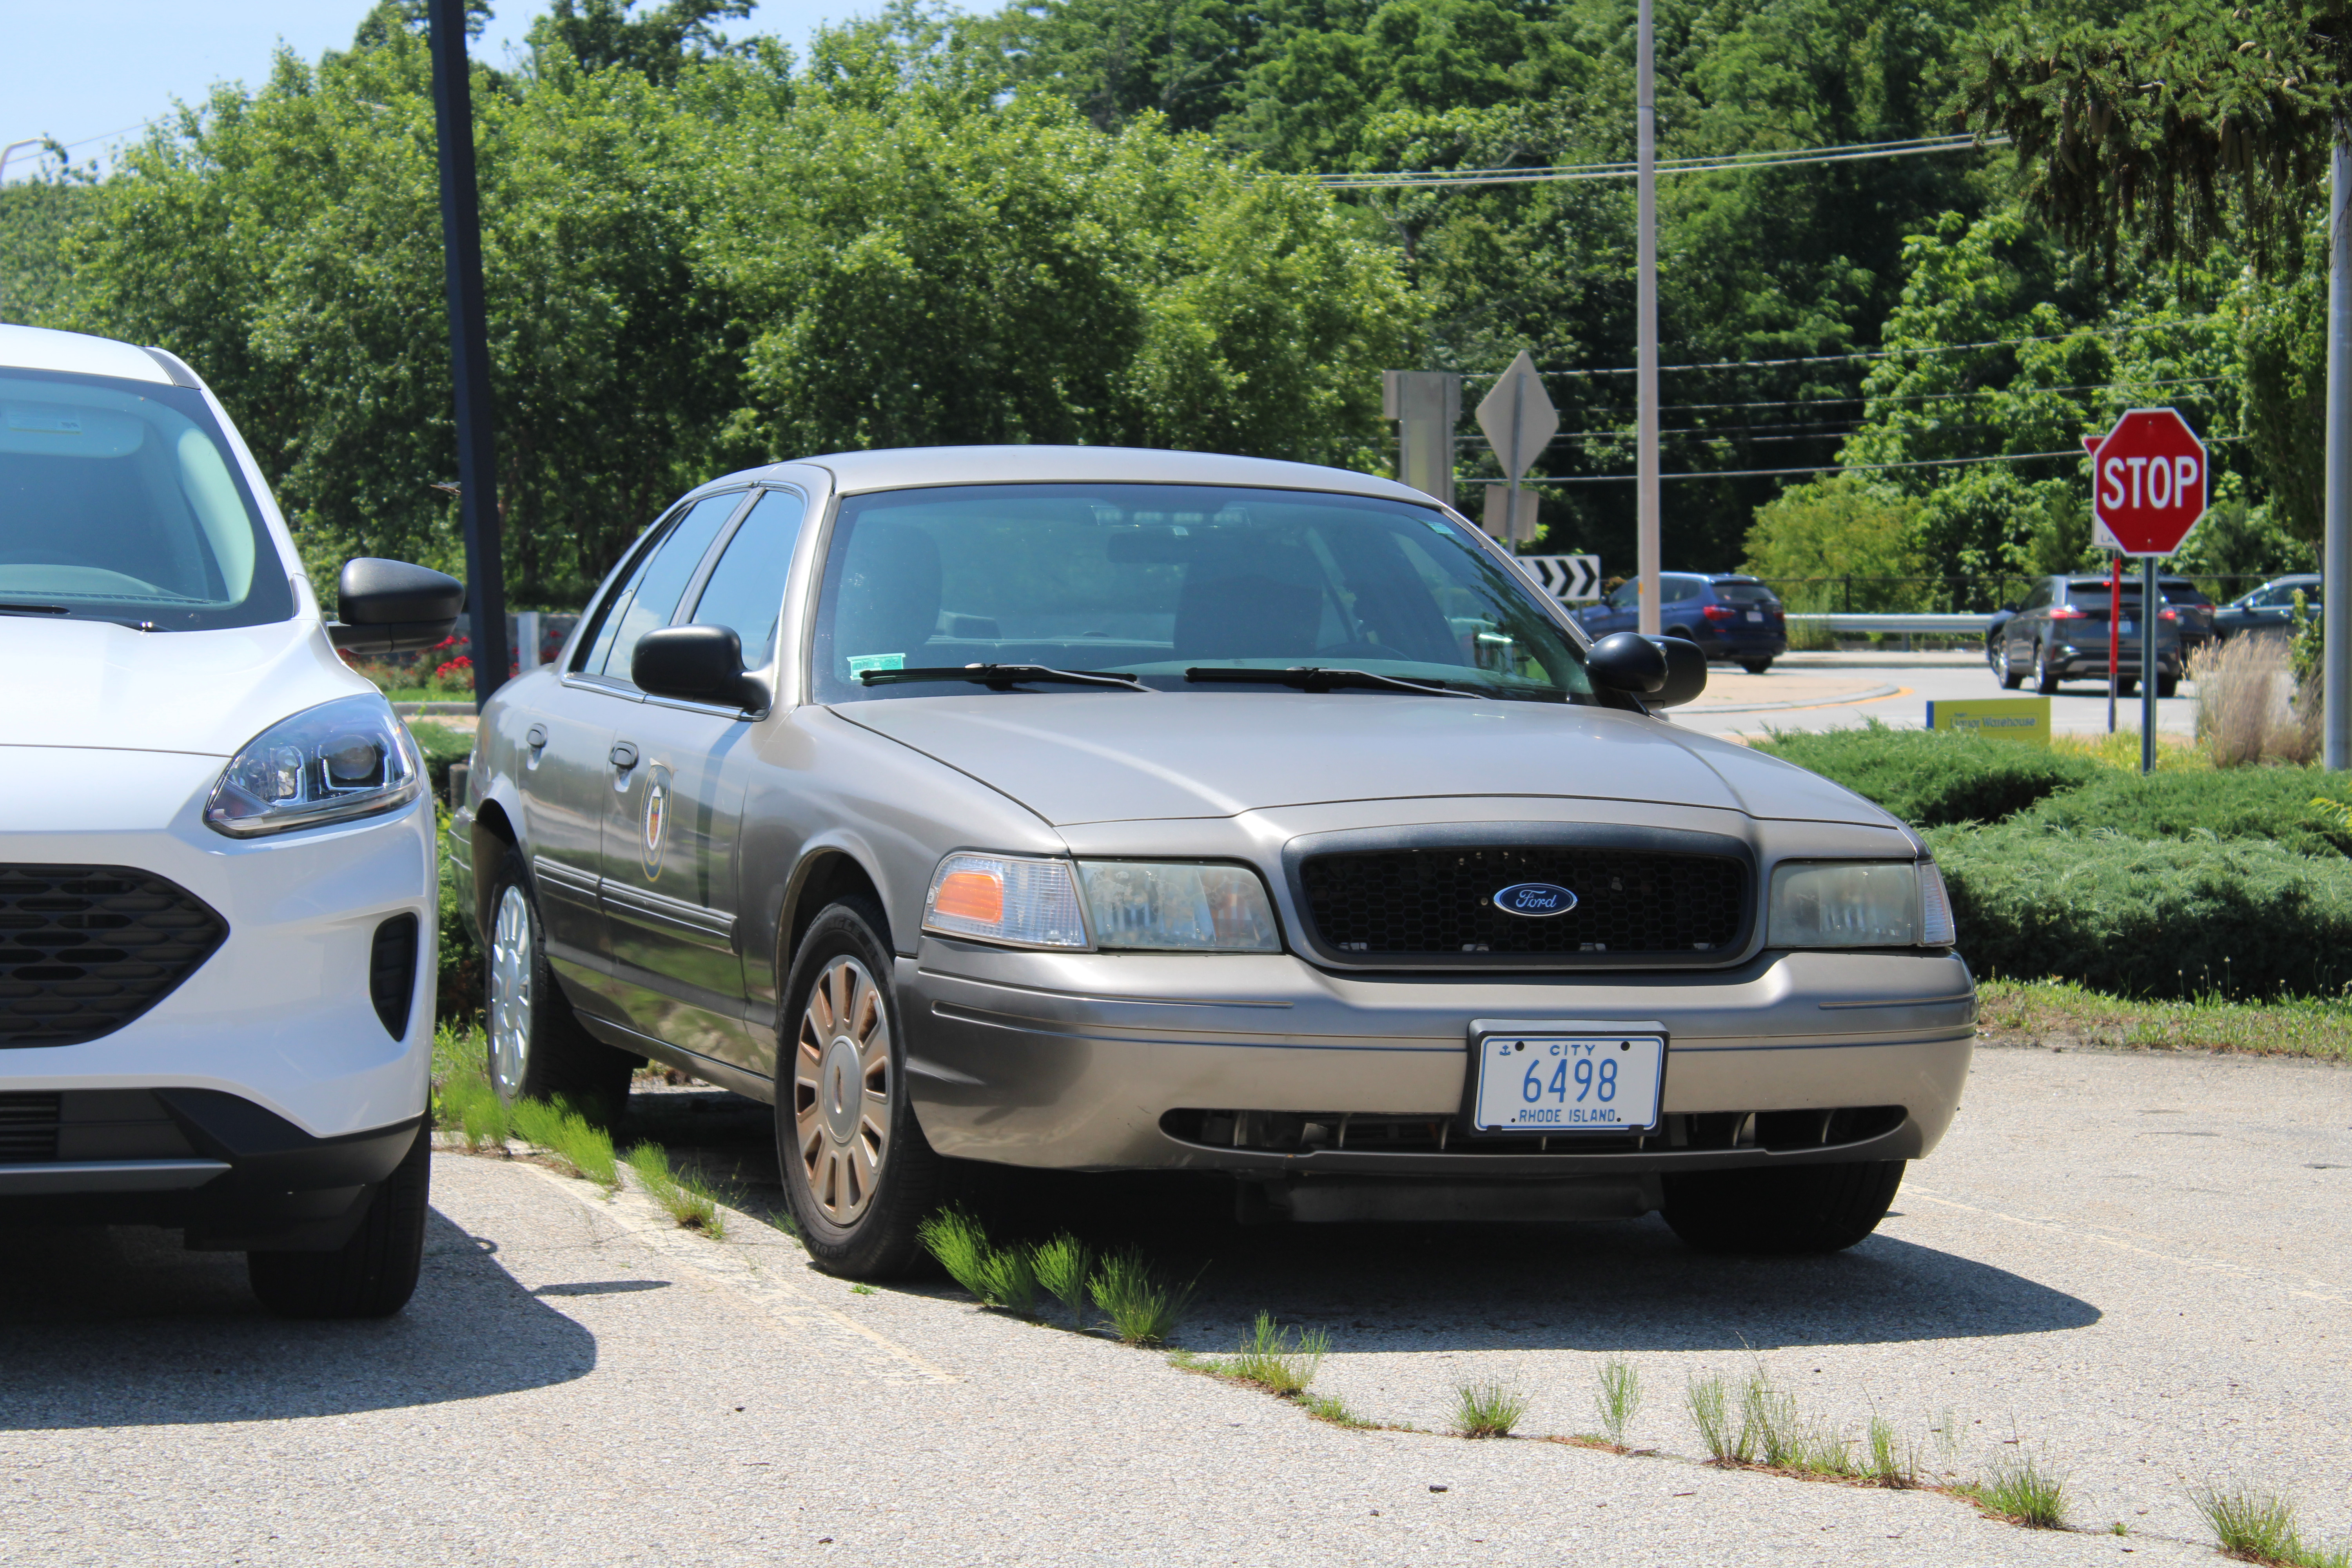 A photo  of Warwick Public Works
            Car 6498, a 2006-2008 Ford Crown Victoria Police Interceptor             taken by @riemergencyvehicles